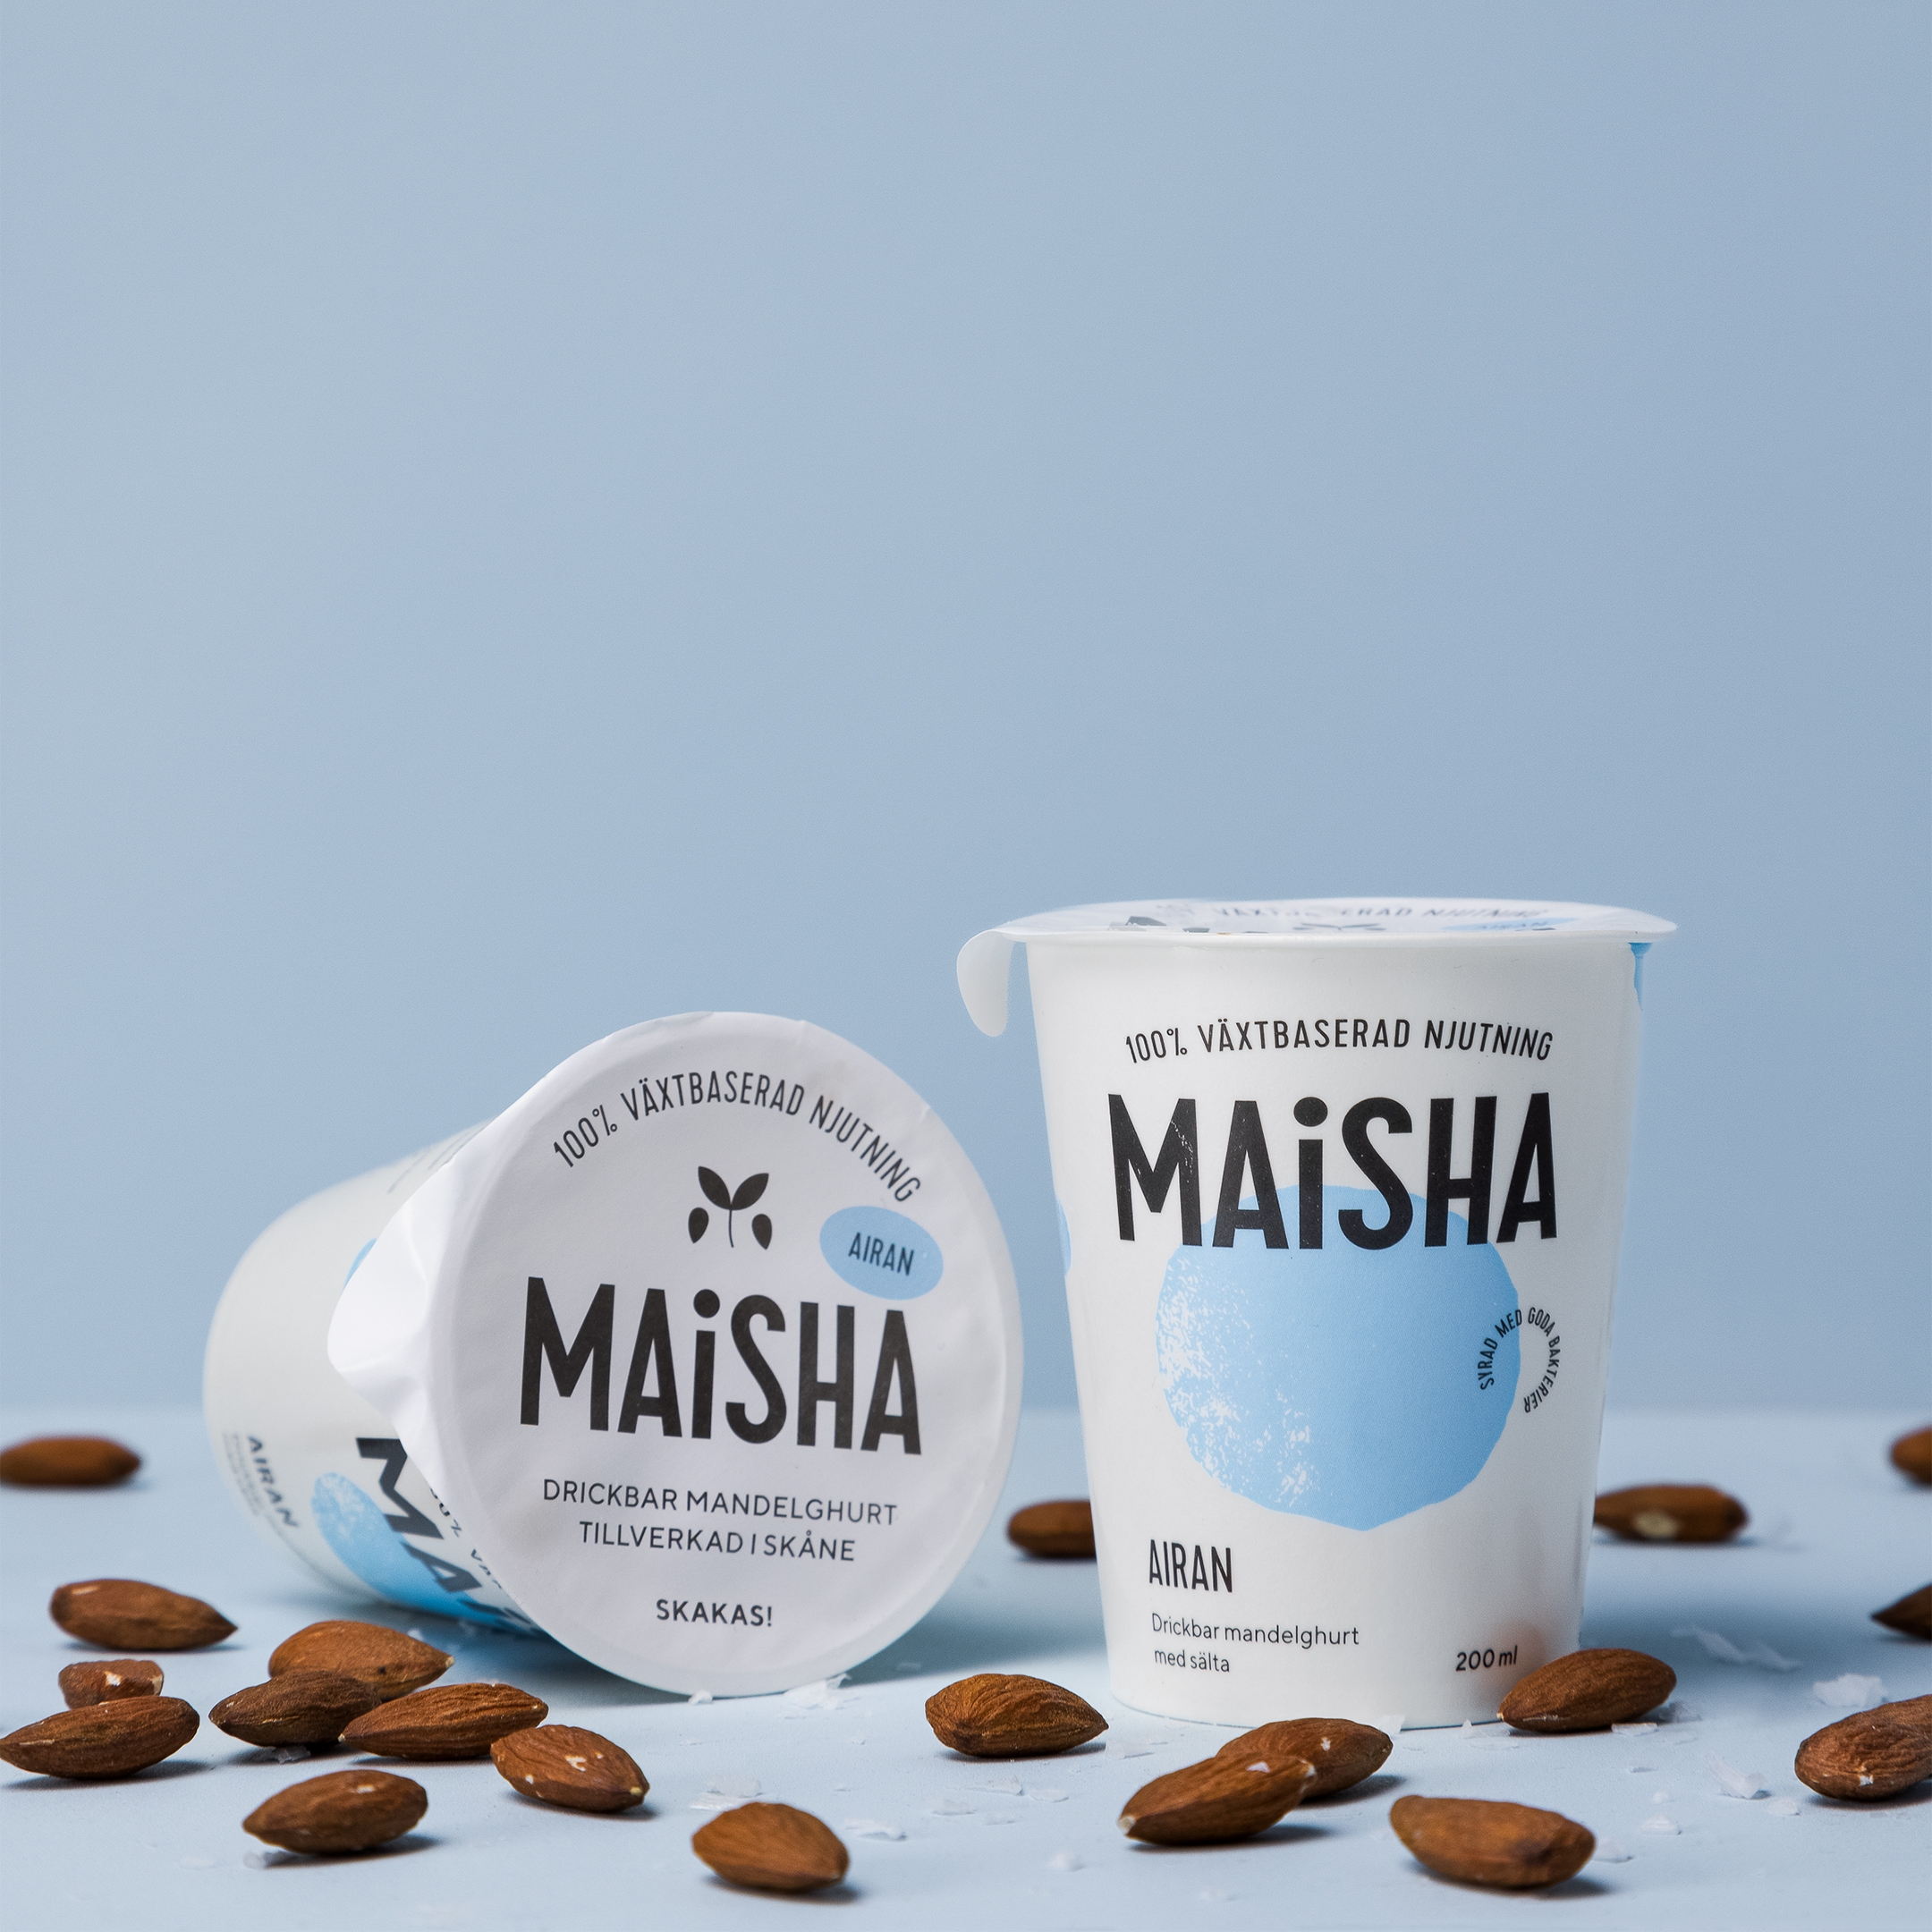 Maisha is a small dairy producing flavorful almond drinks.